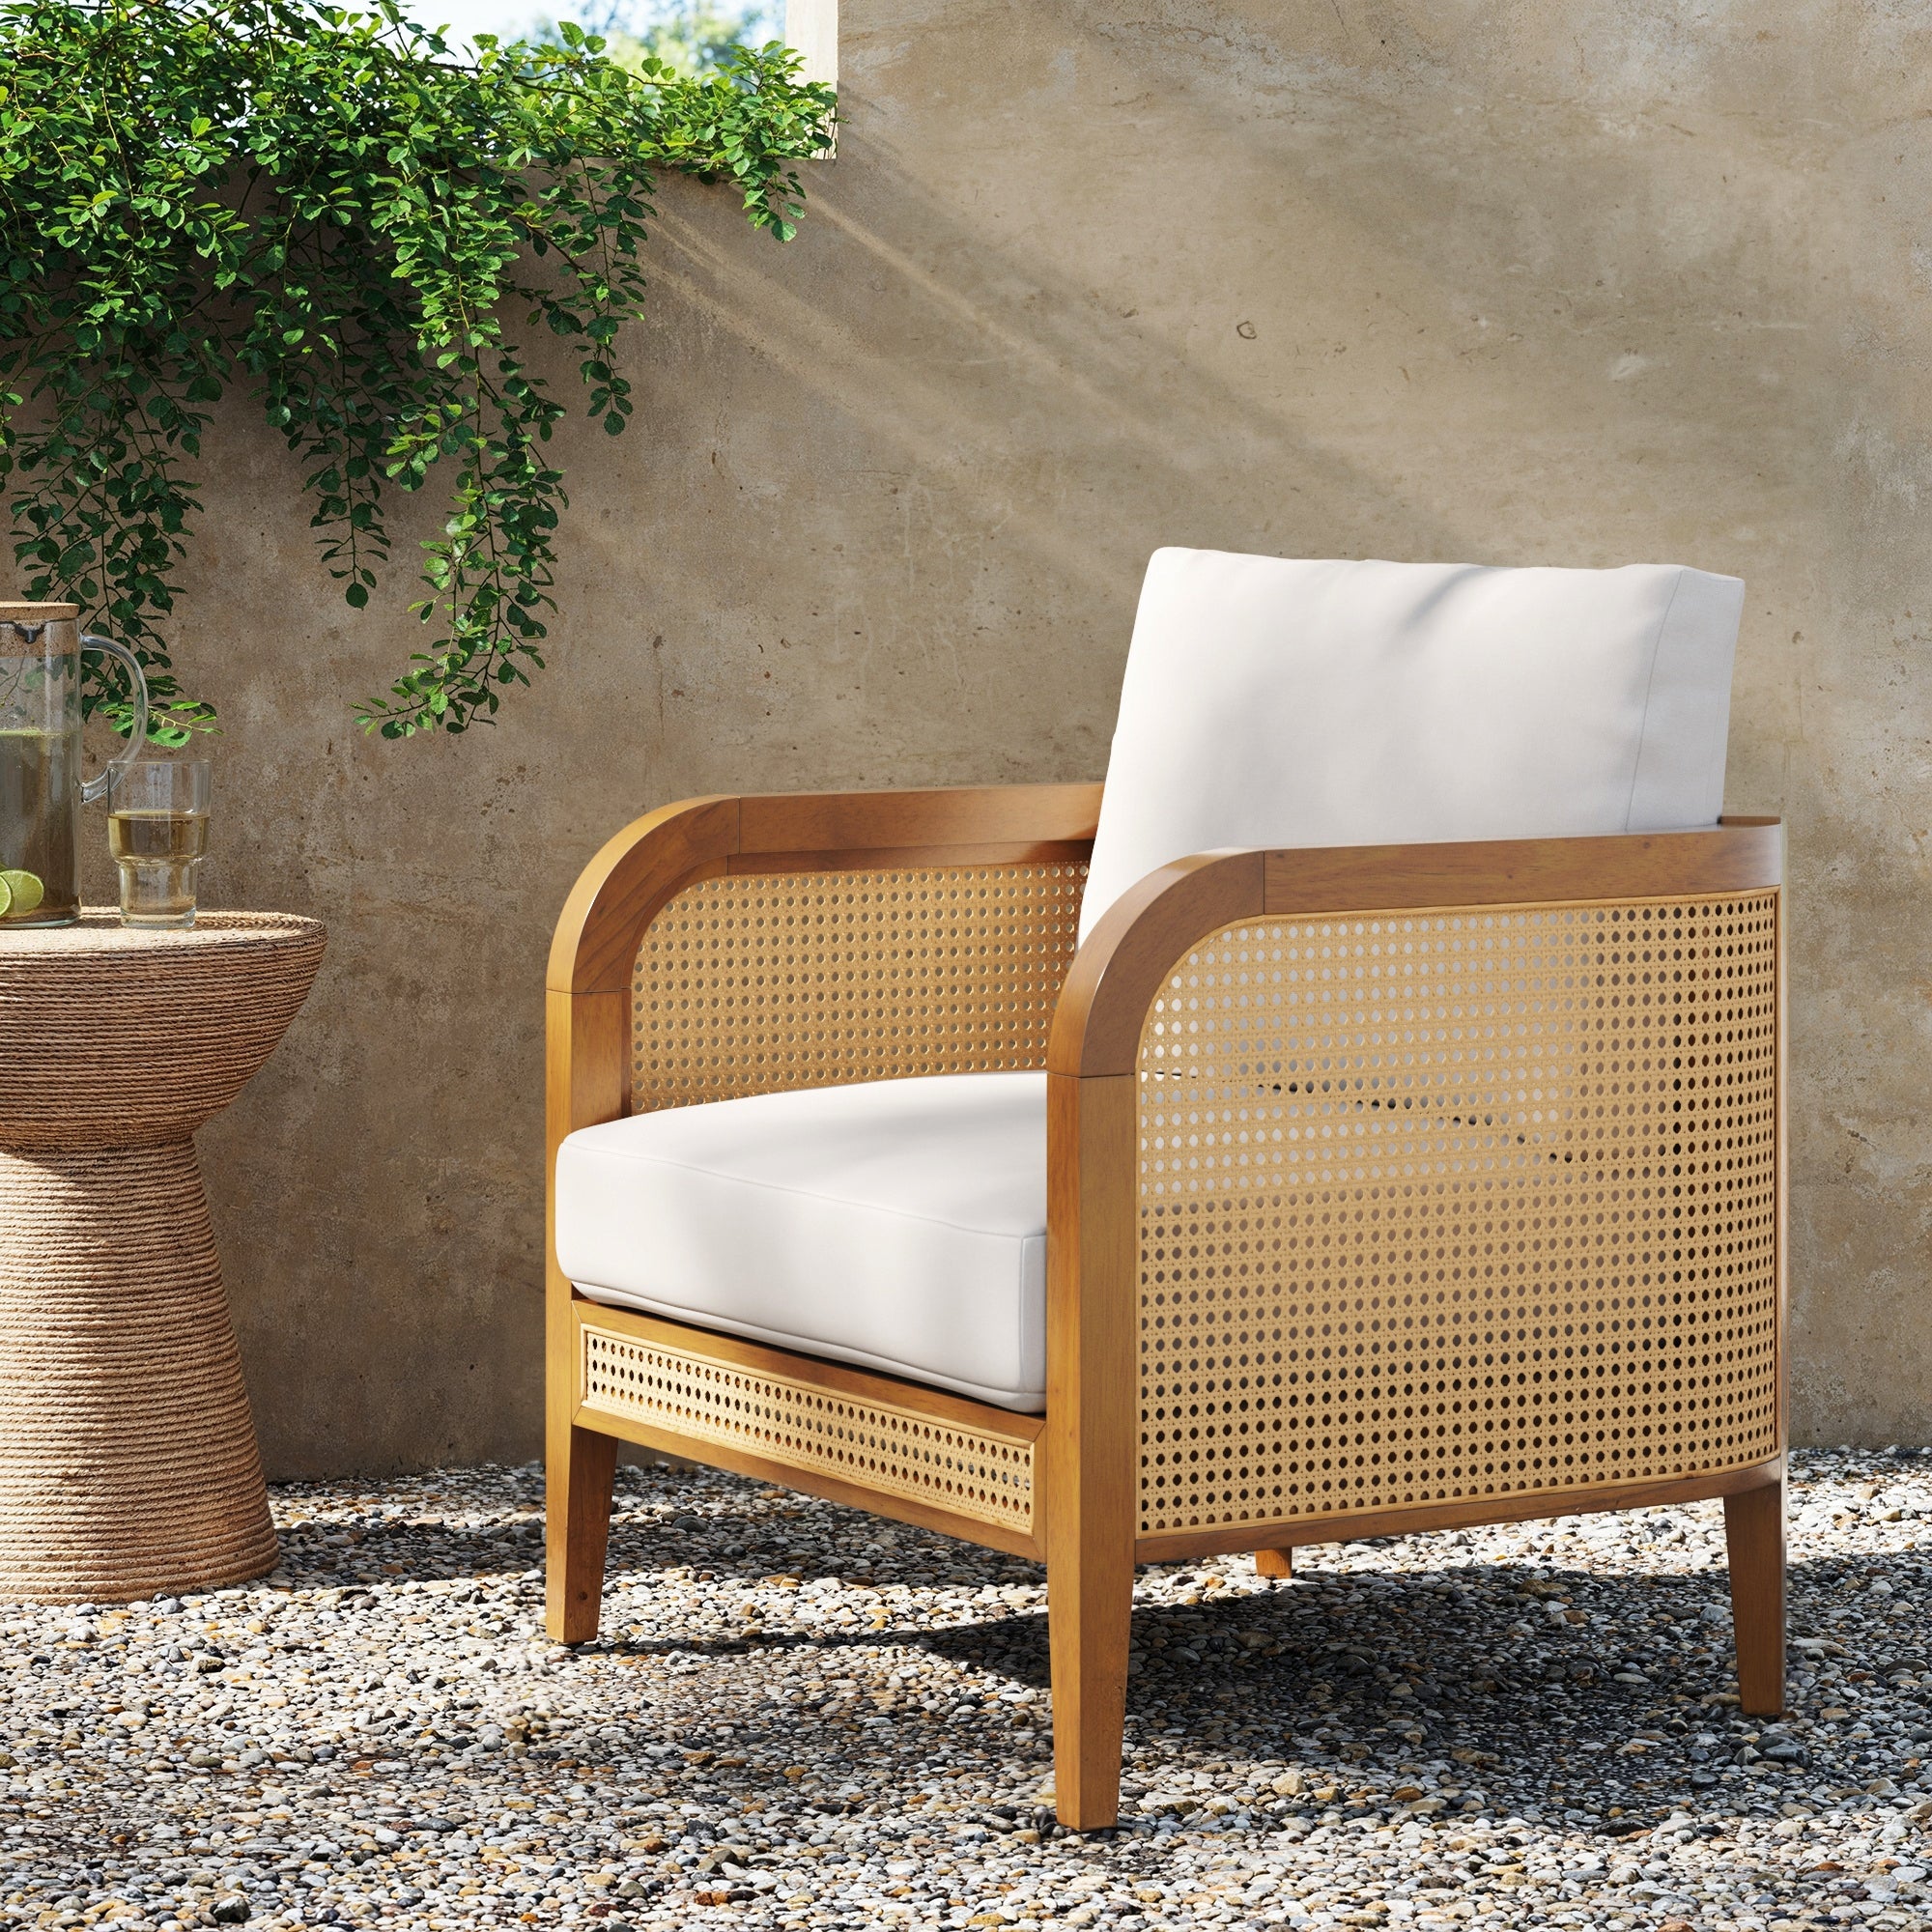 Set of 4 Rattan Outdoor Patio Arm Chairs